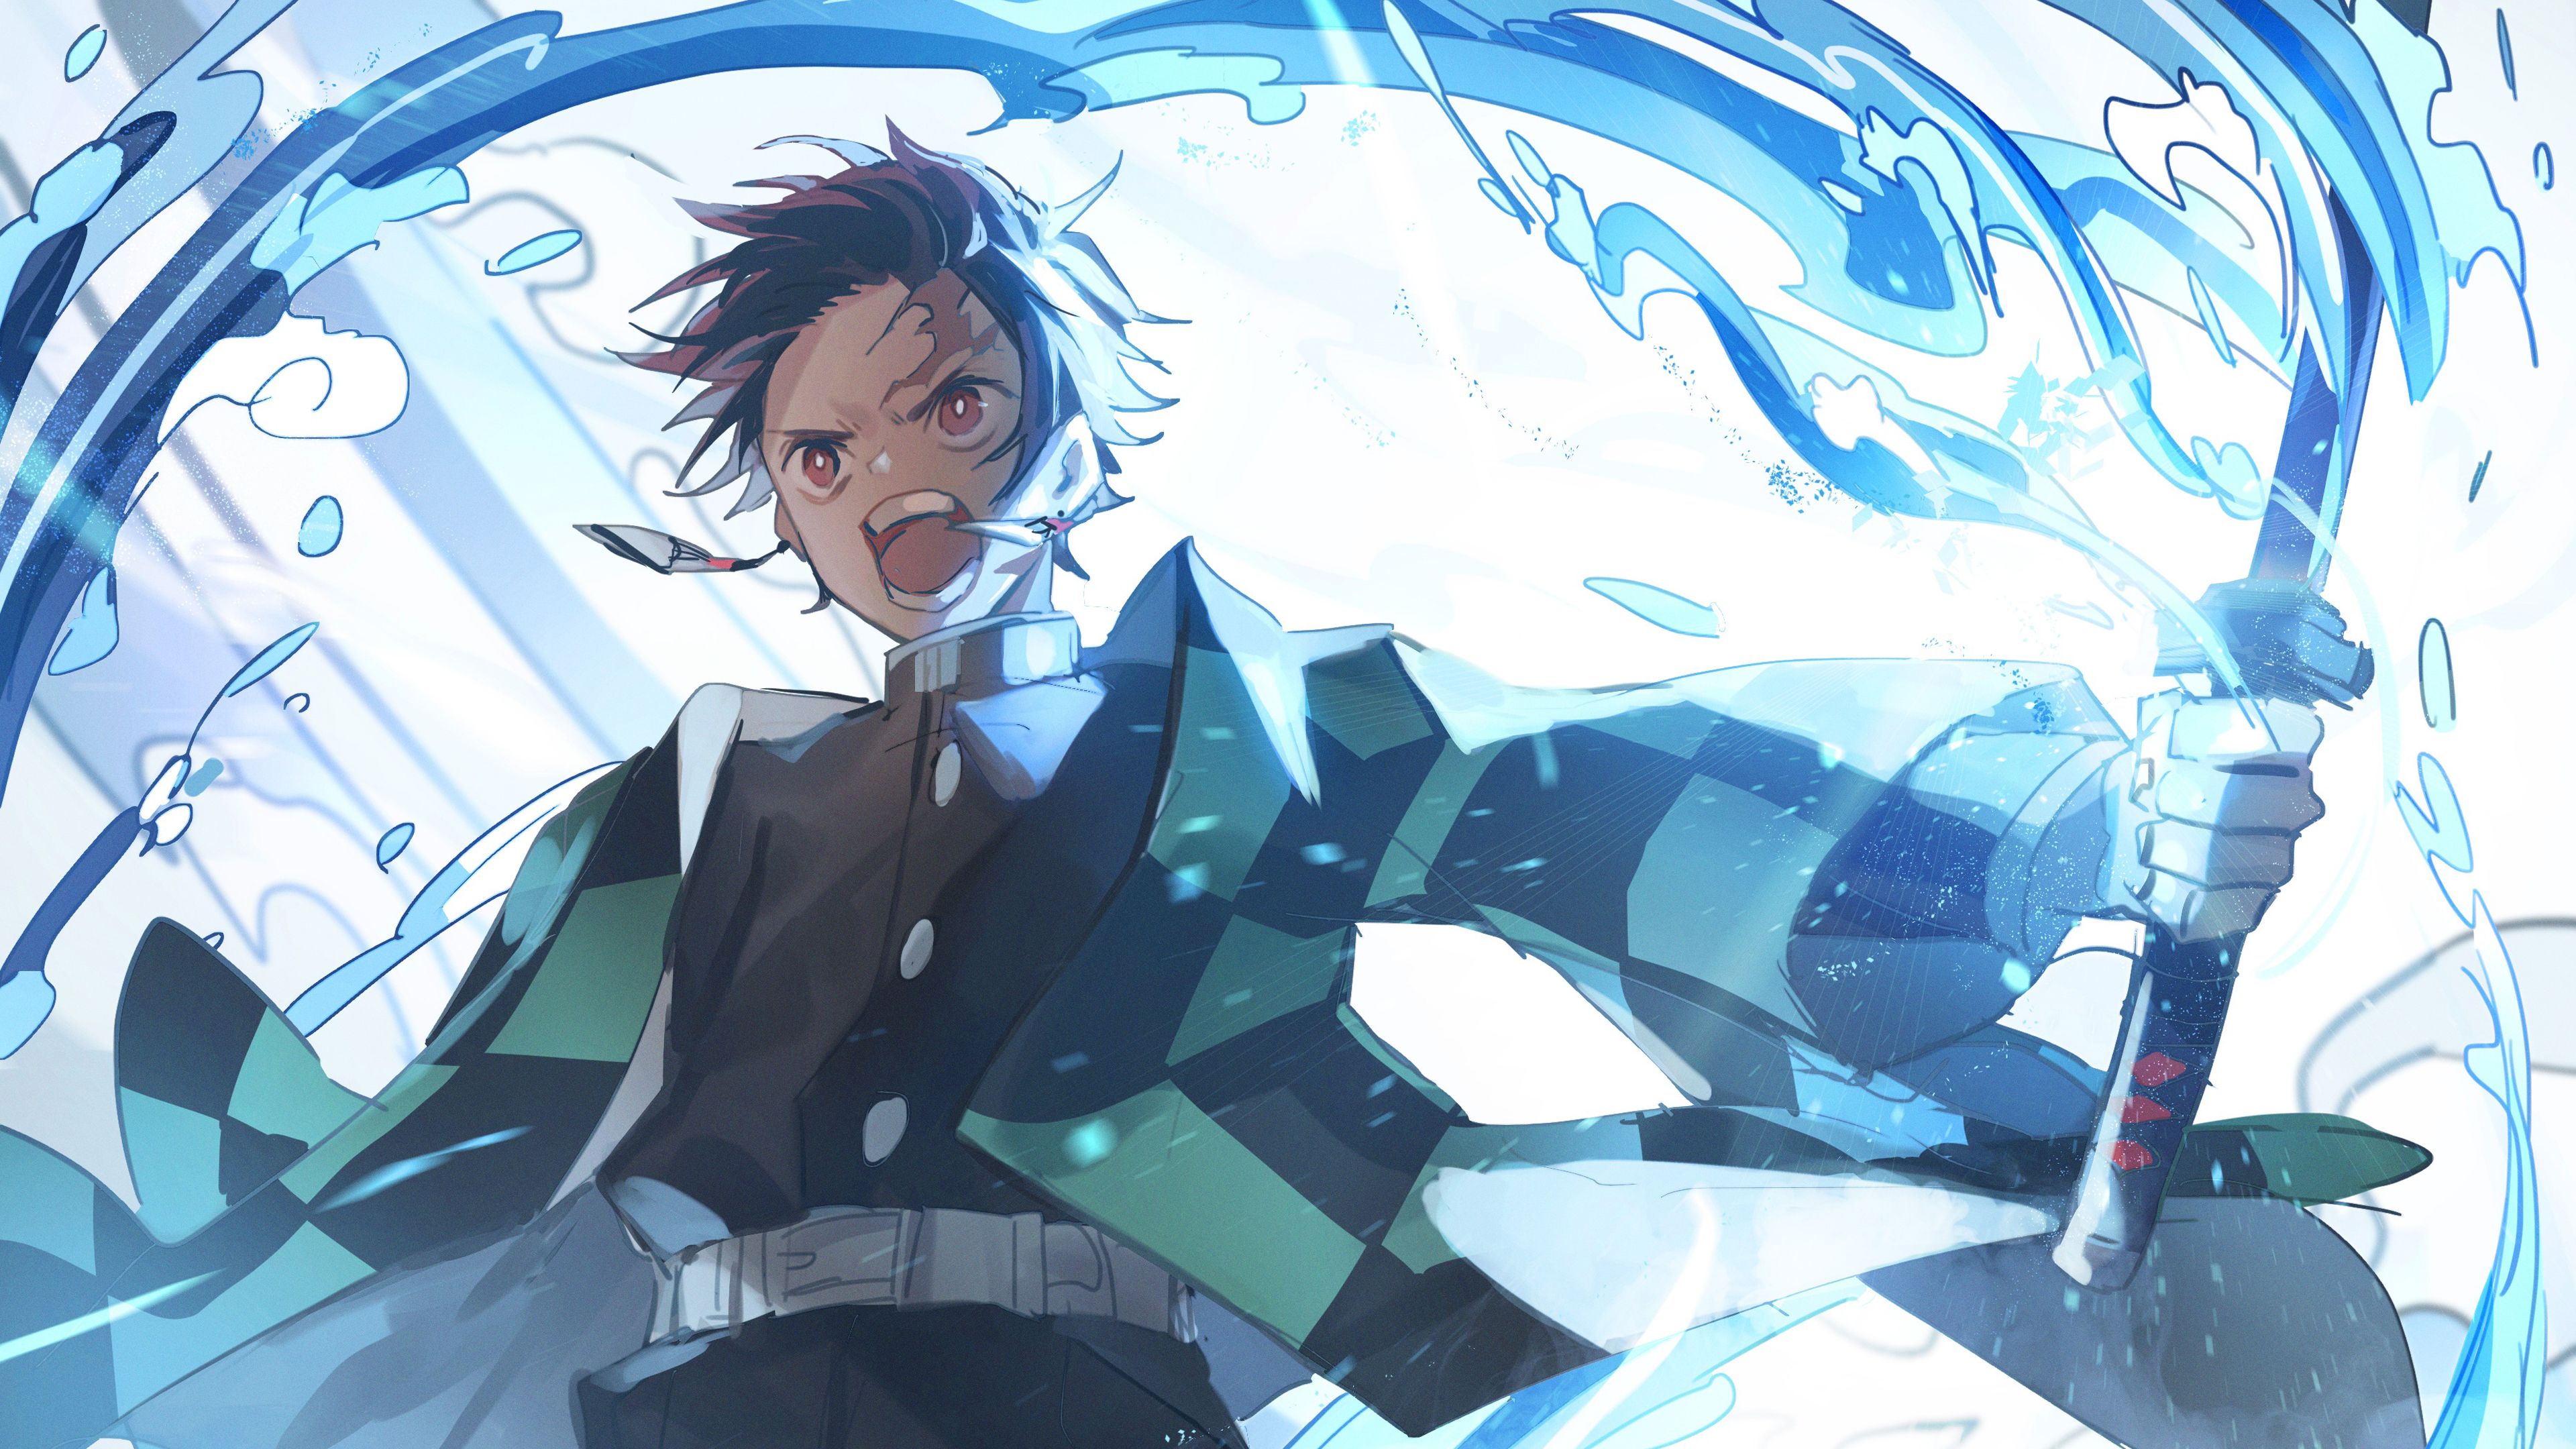 Demon Slayer Tanjirou Kamado Angry With Weapon With Background Of Blue And White Abstract 4K HD Anime Wallpaper</a> Wallpaper